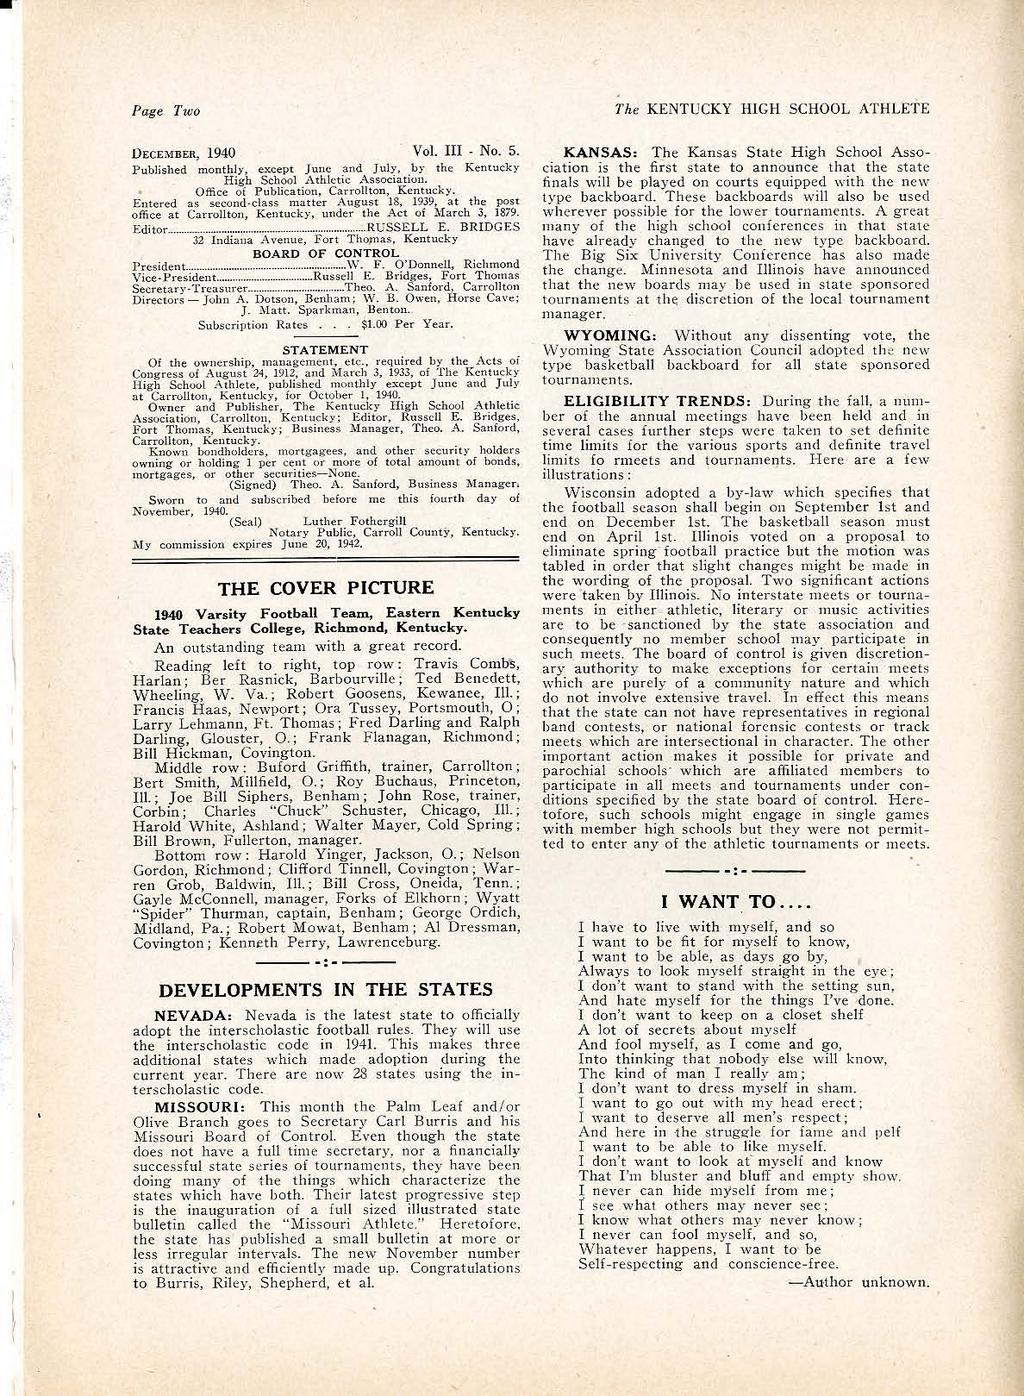 Page Two DECEMBER, 194{) Vol. - No. 5. Publshed mont hly, except J u ne and July, by the Kemucky H gh School Athletc Assocaton. Offce of Publcaton, Carrollton, Kentuck y.